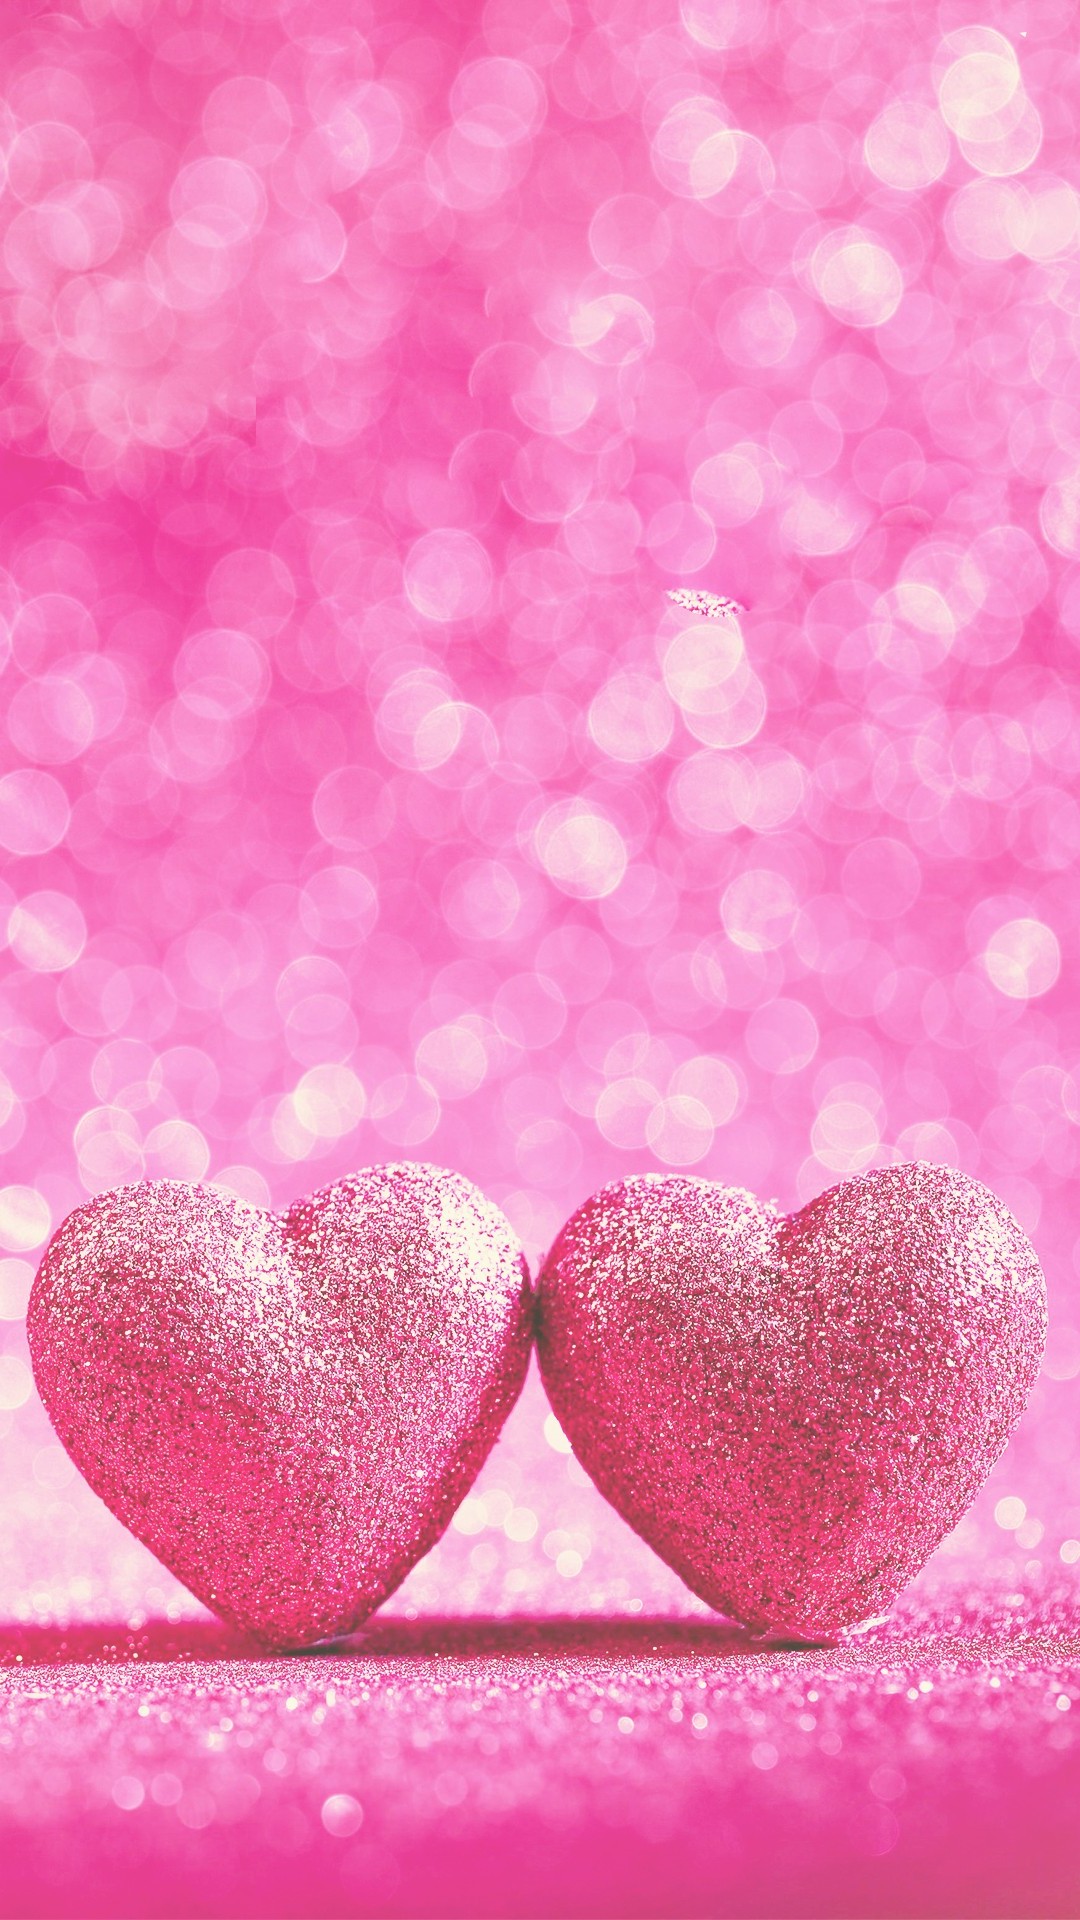 Pink Love Wallpaper Android With Hd Resolution - Pink Wallpaper Hd For Android - HD Wallpaper 